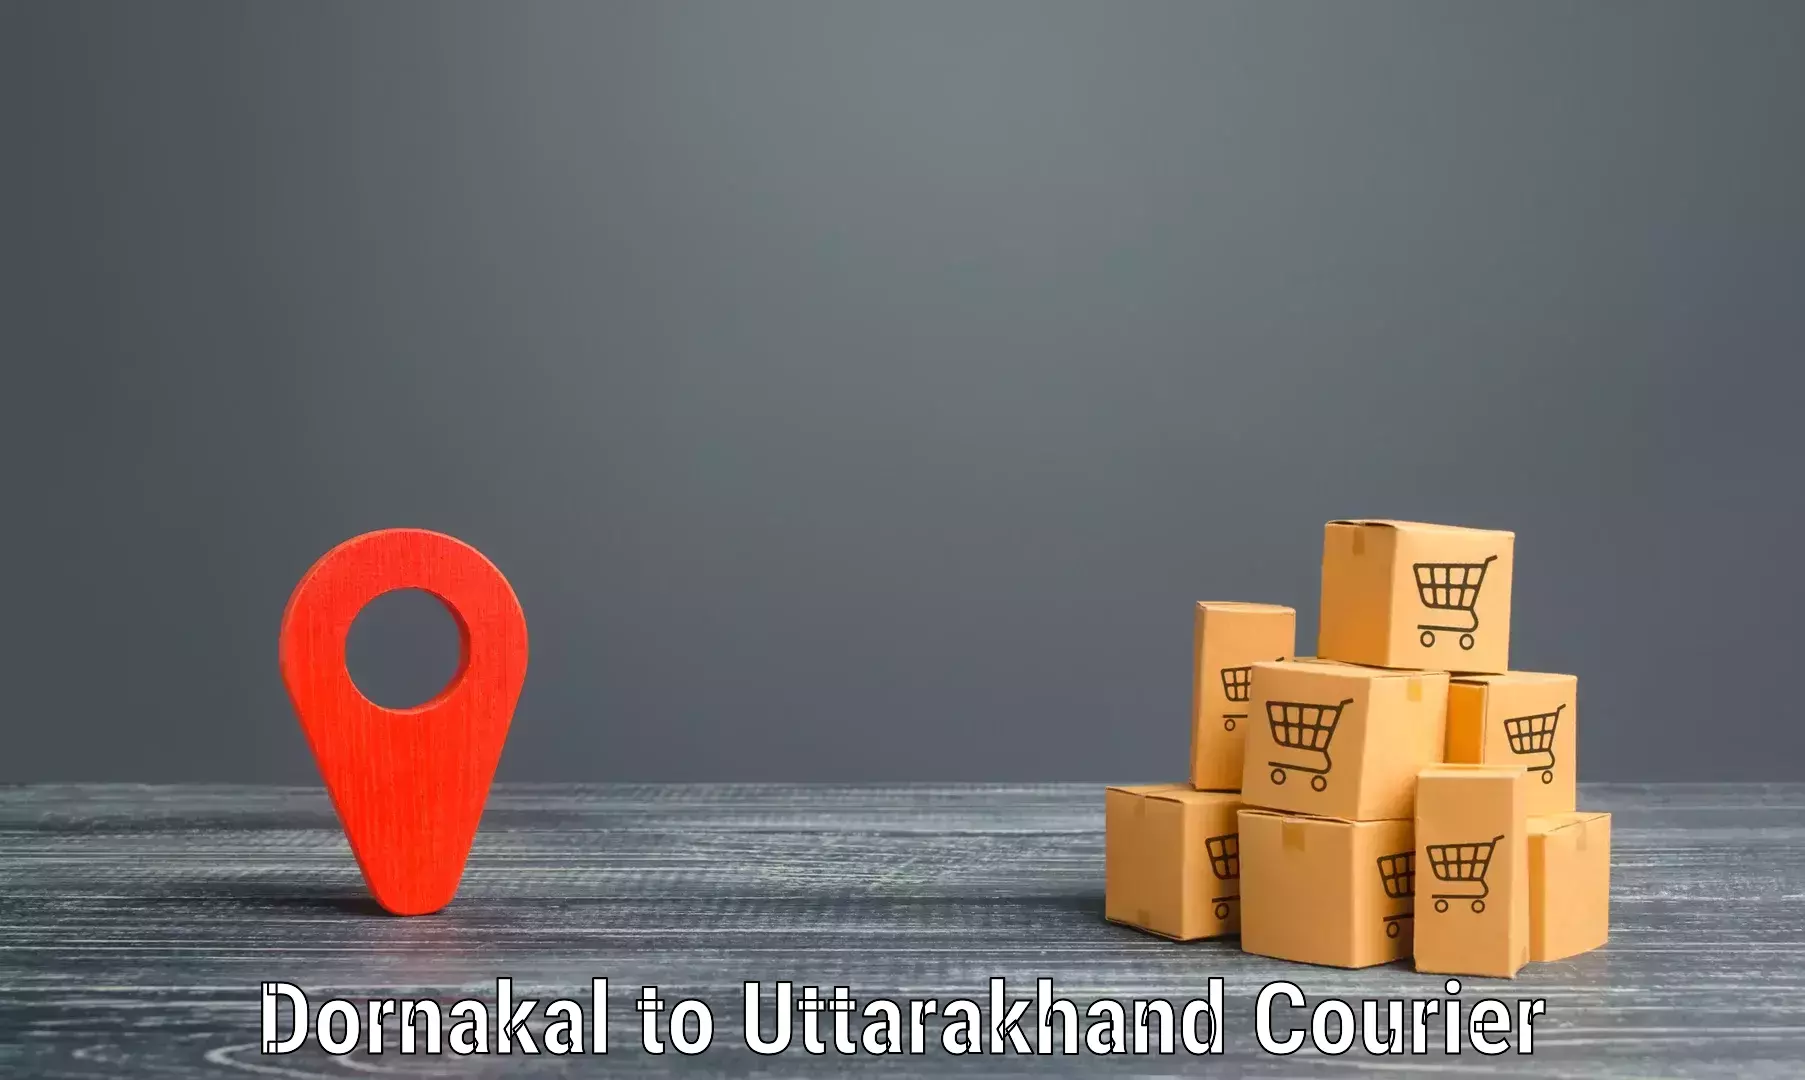 Efficient freight service Dornakal to Rudrapur